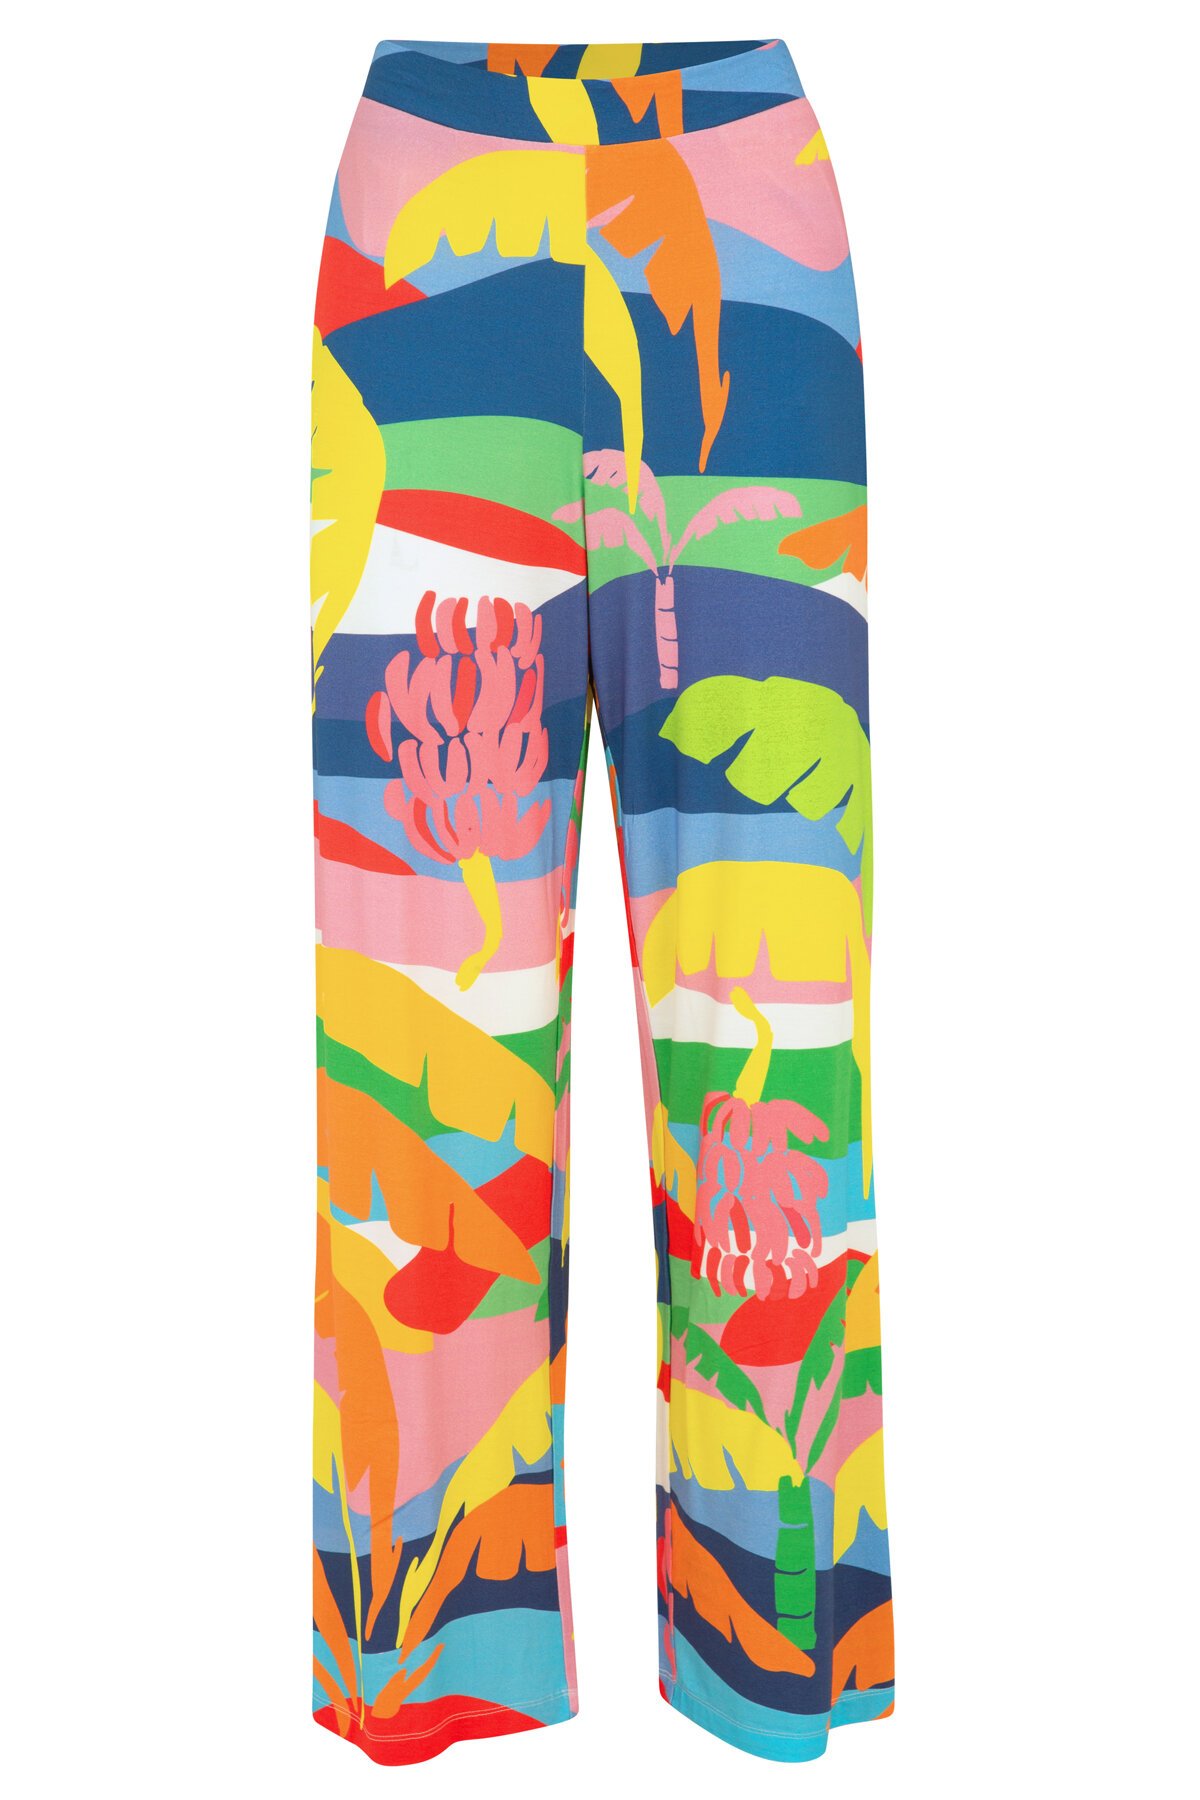 PANTS DOWN Pant - Curate : Trelise Cooper Online - PLAYFUL PALM SPRINGS ...